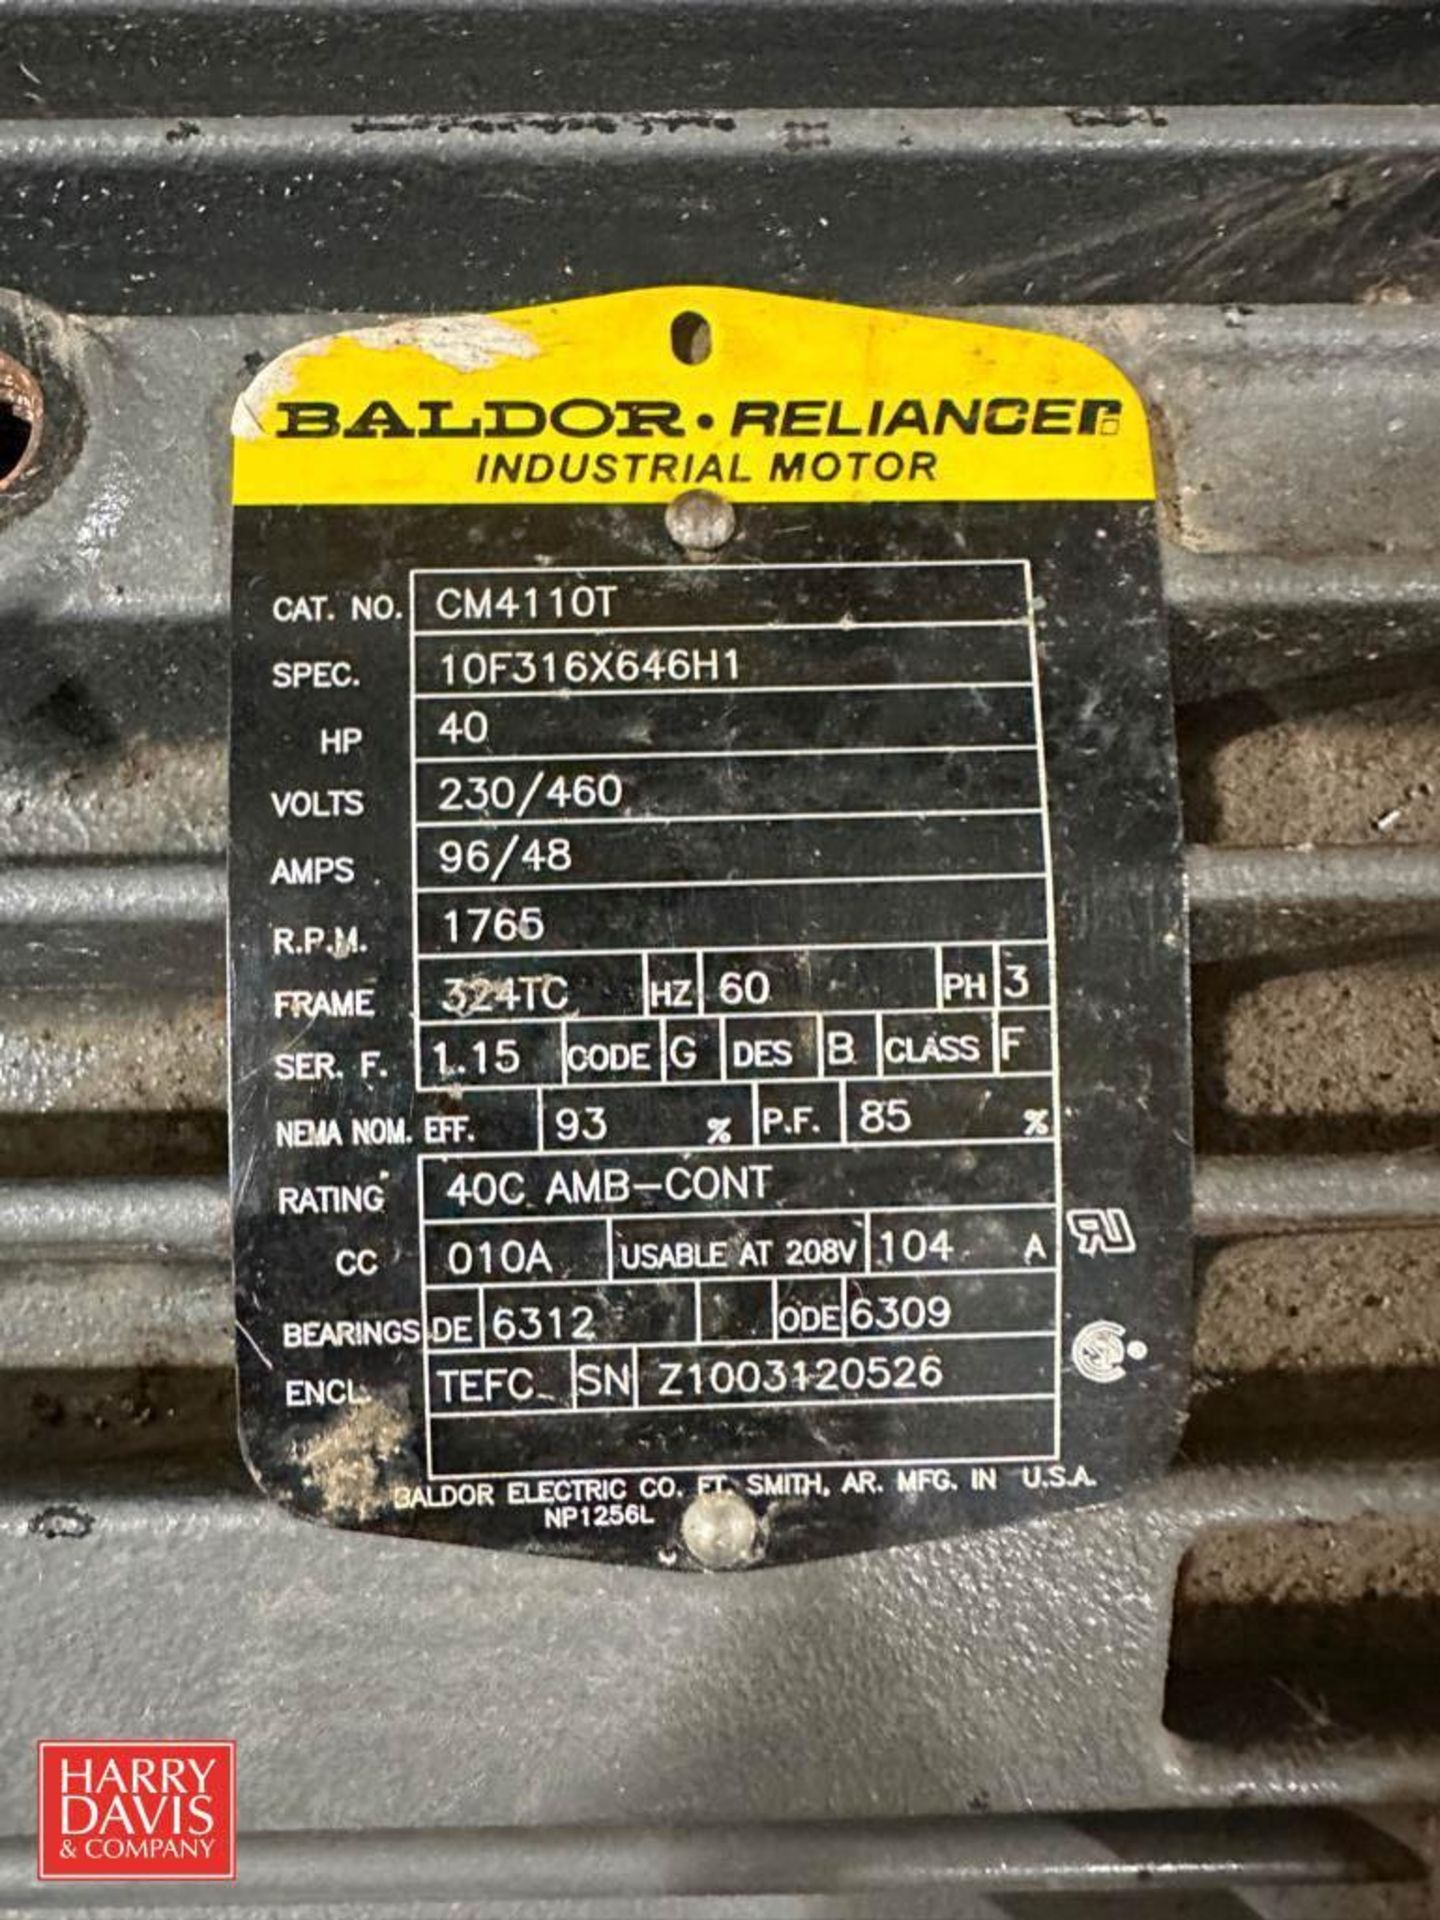 NEW Baldor 40 HP 1,765 RPM Motor with Nord 104 RPM Gear Reducing Drive - Image 2 of 3